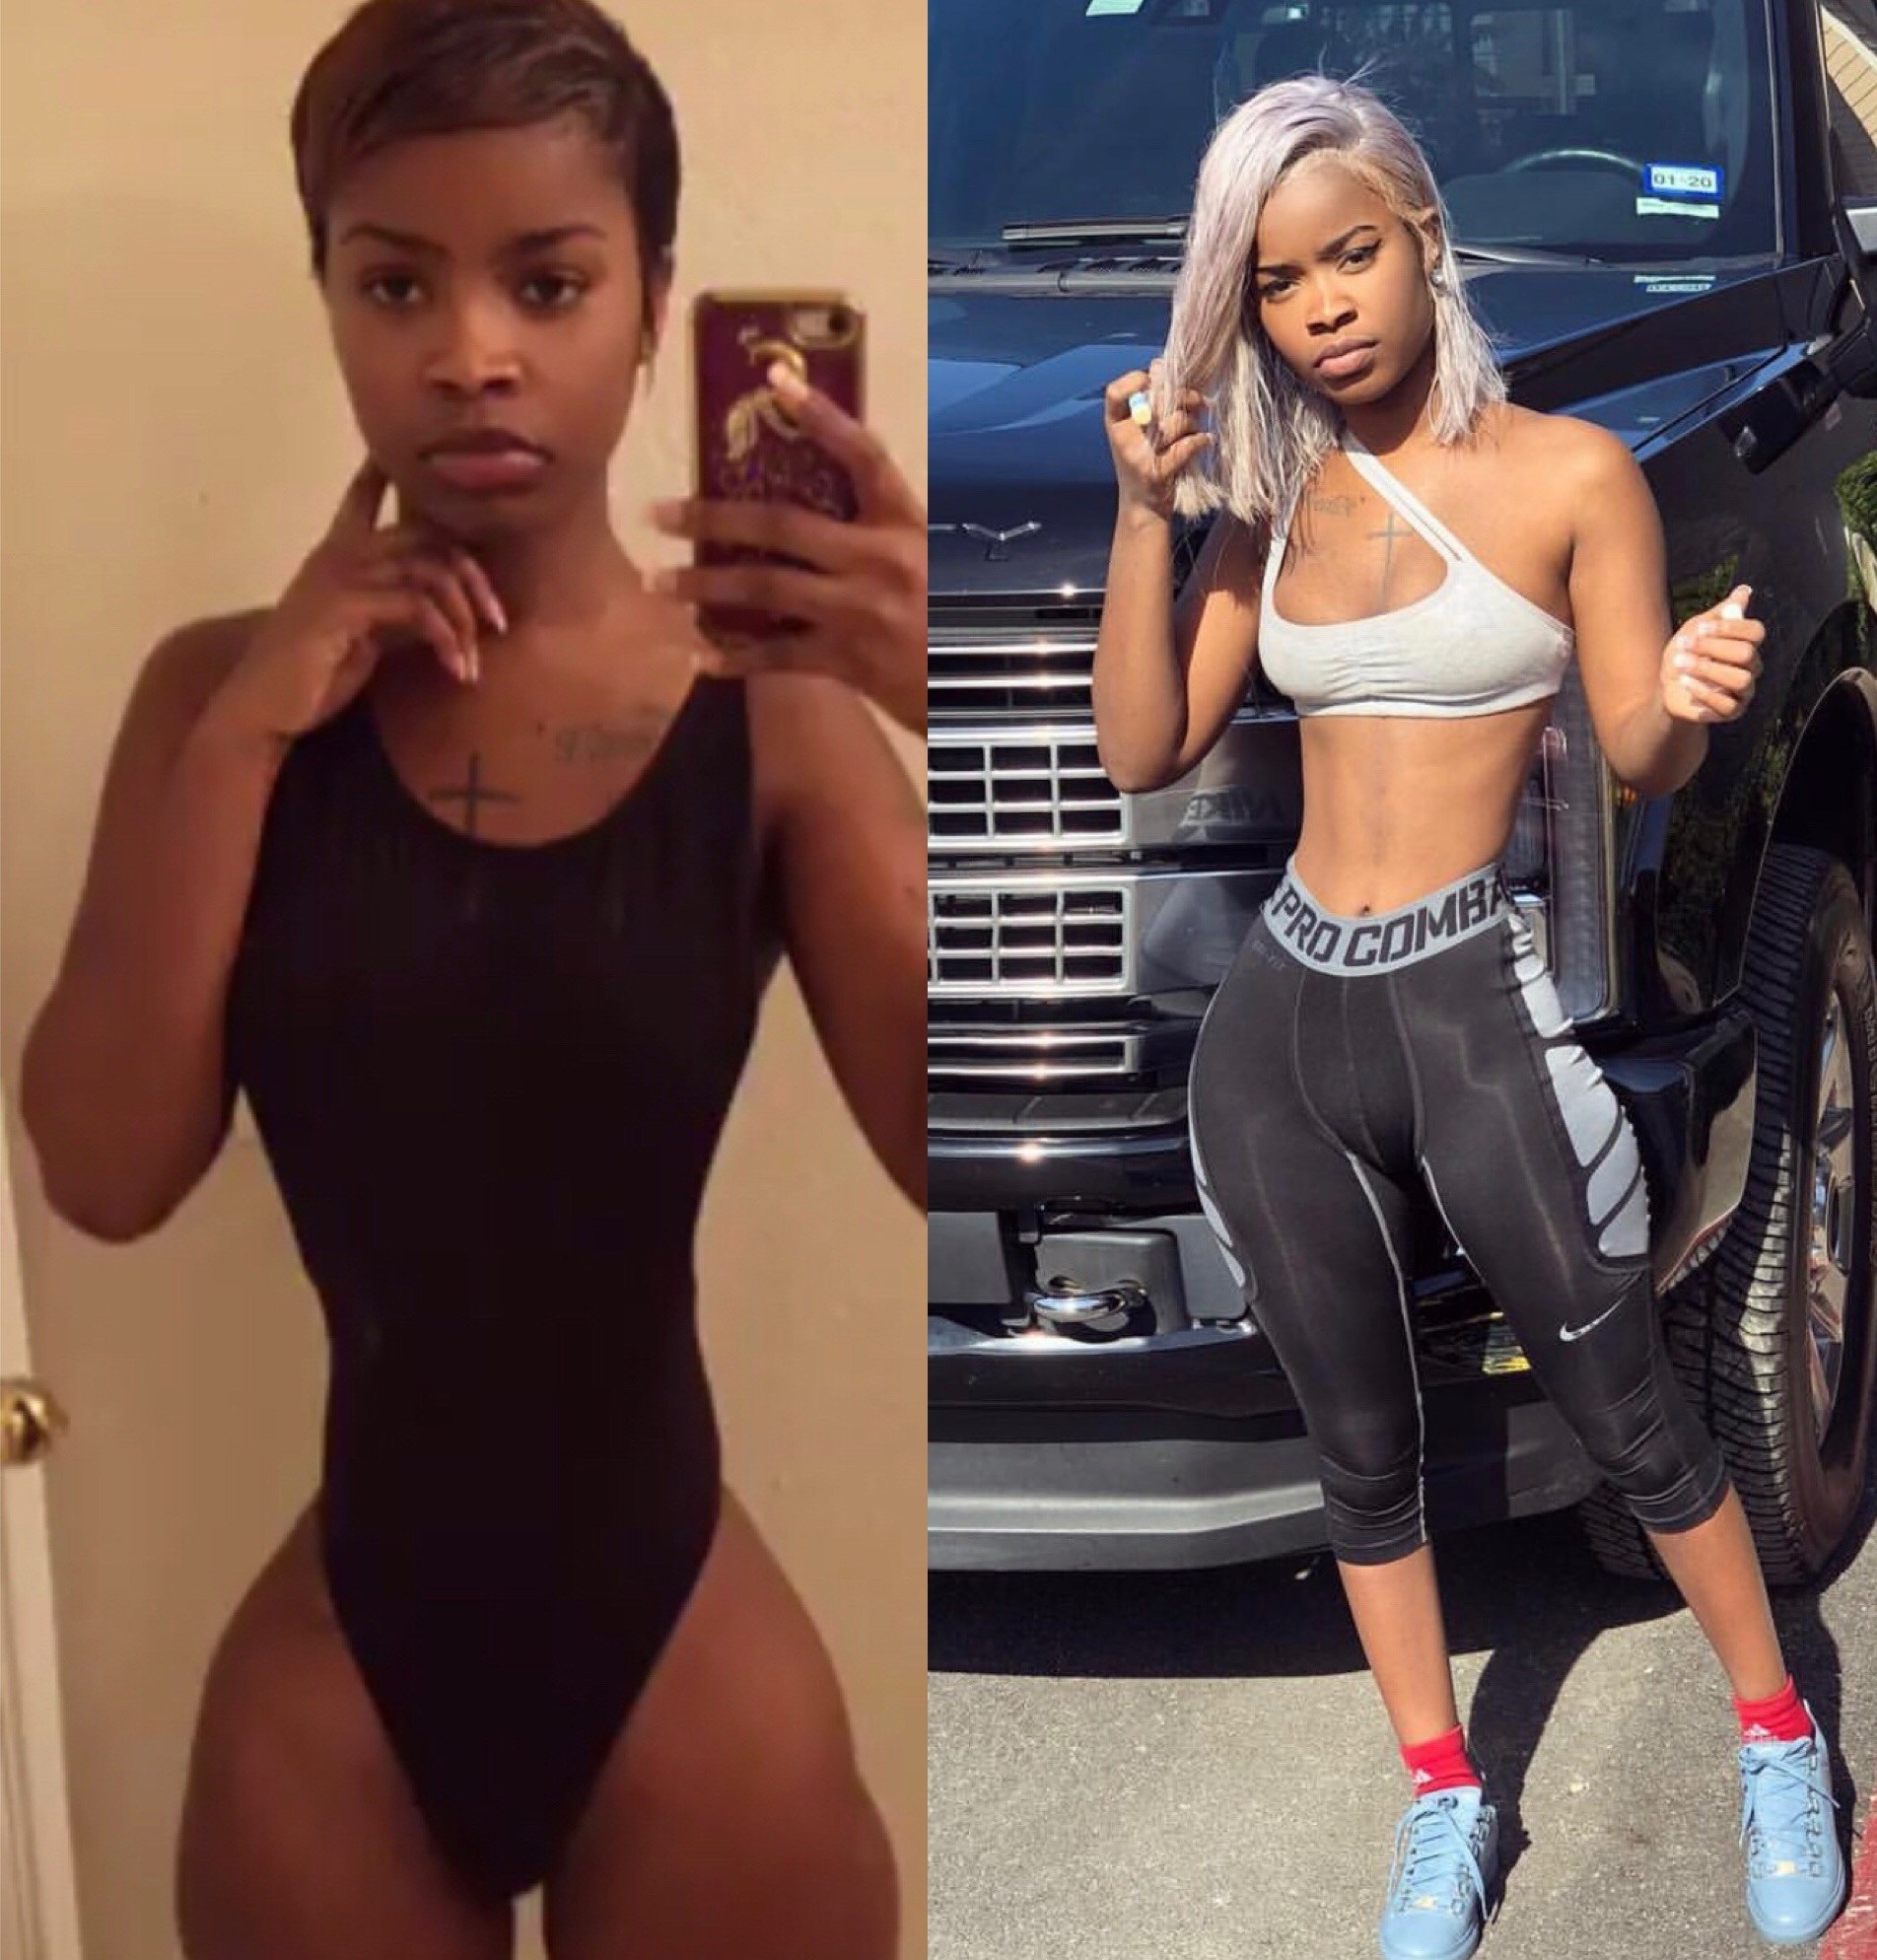 Meet the Instagram model with one of the tiniest waist ever